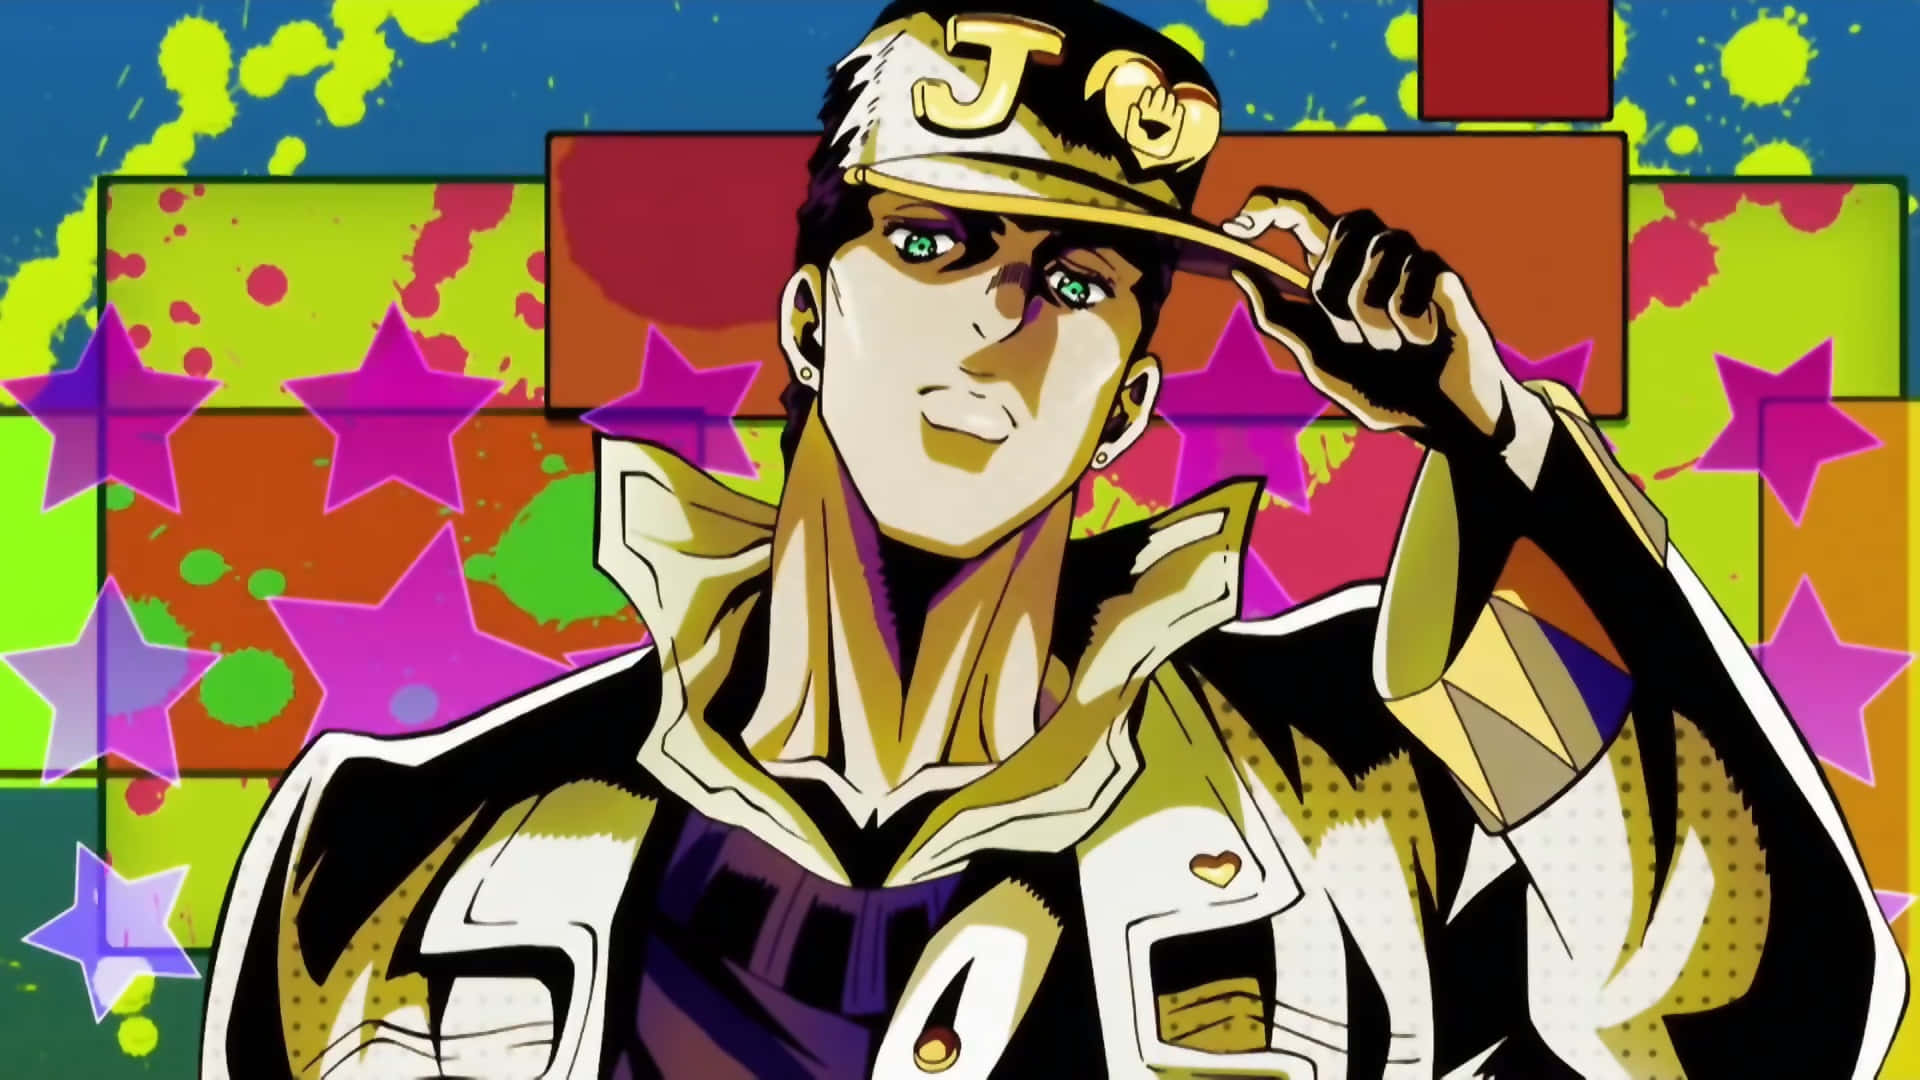 "The fight of Stardust Crusaders and Stardust Overdrive."